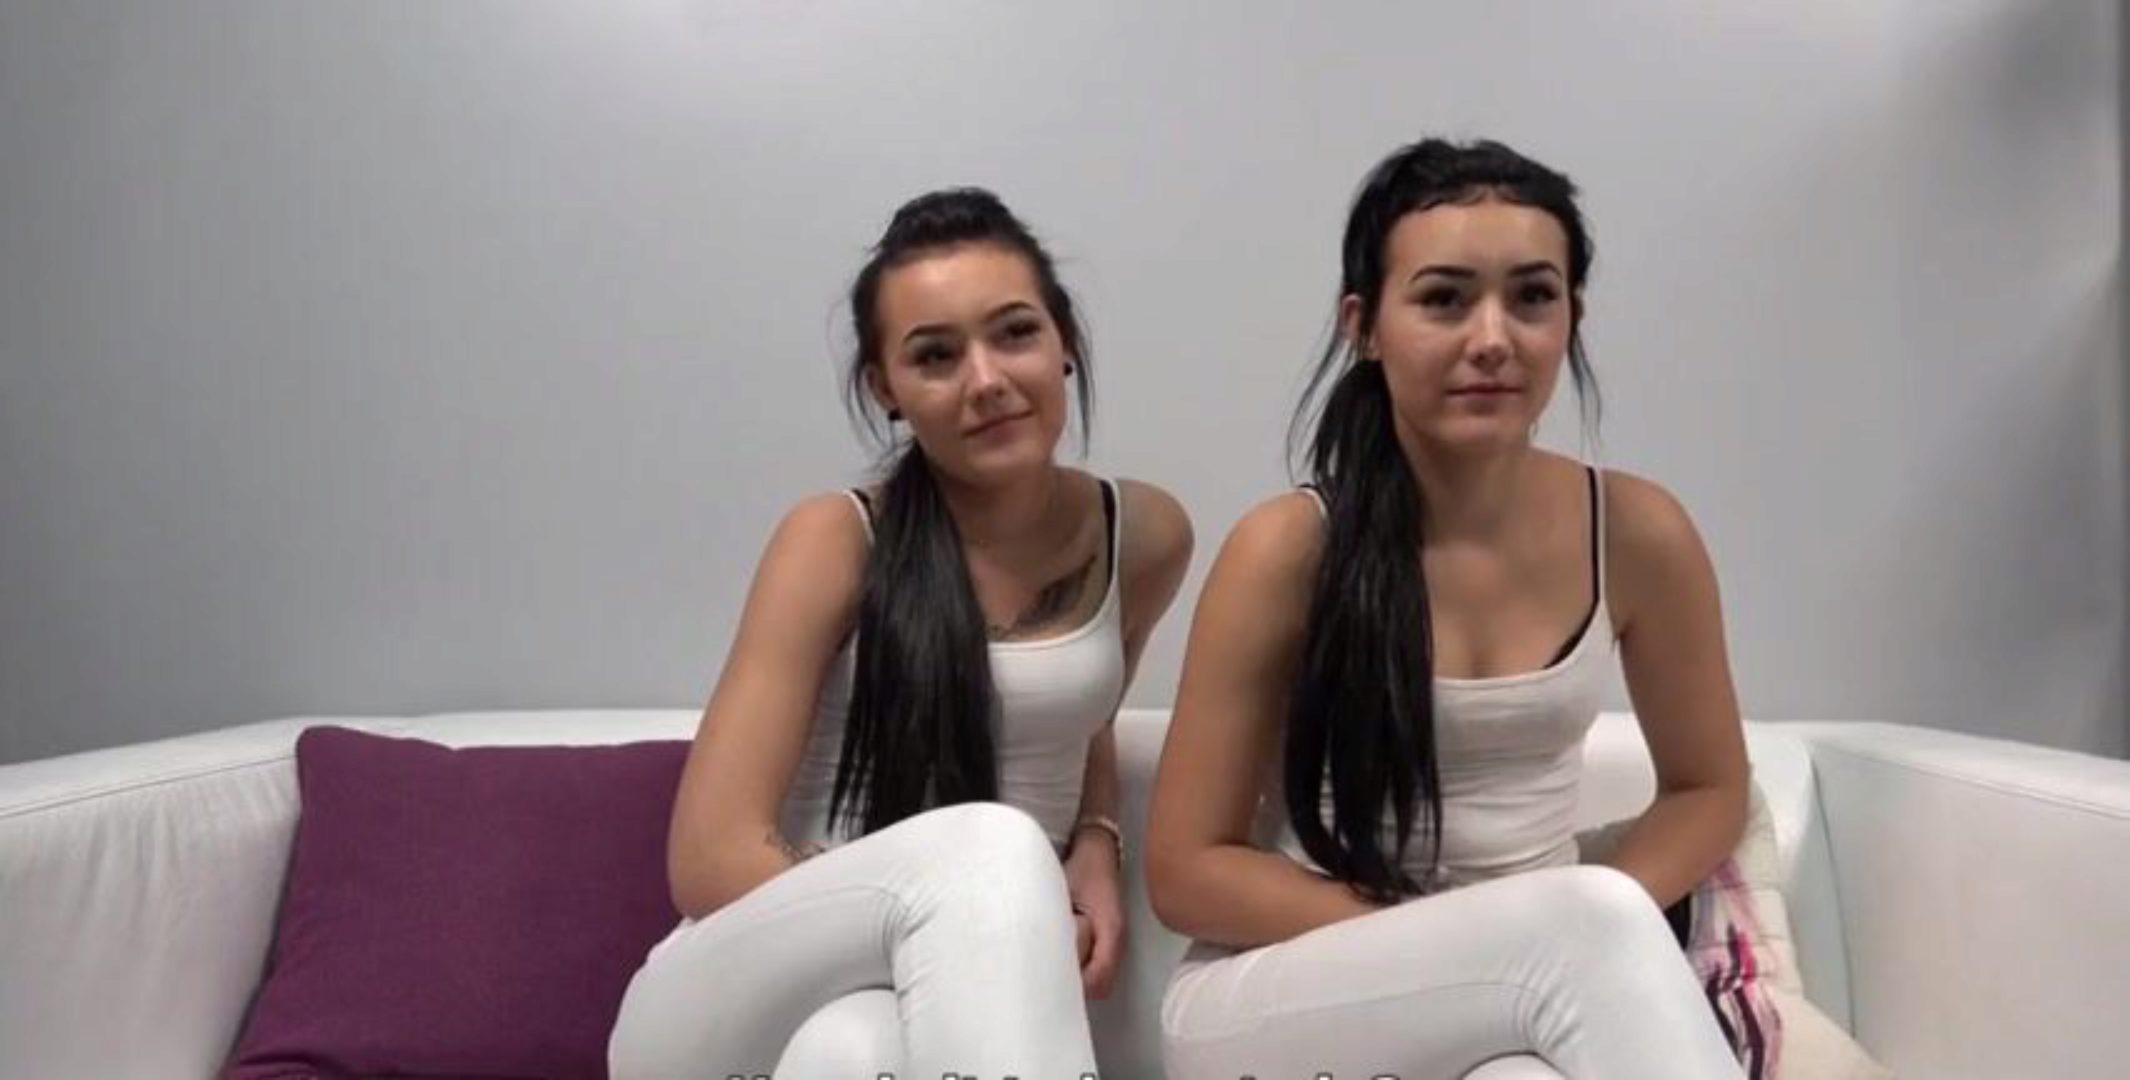 Lesbian Identical Twin Sisters The Jolie Twins - XVDS TV